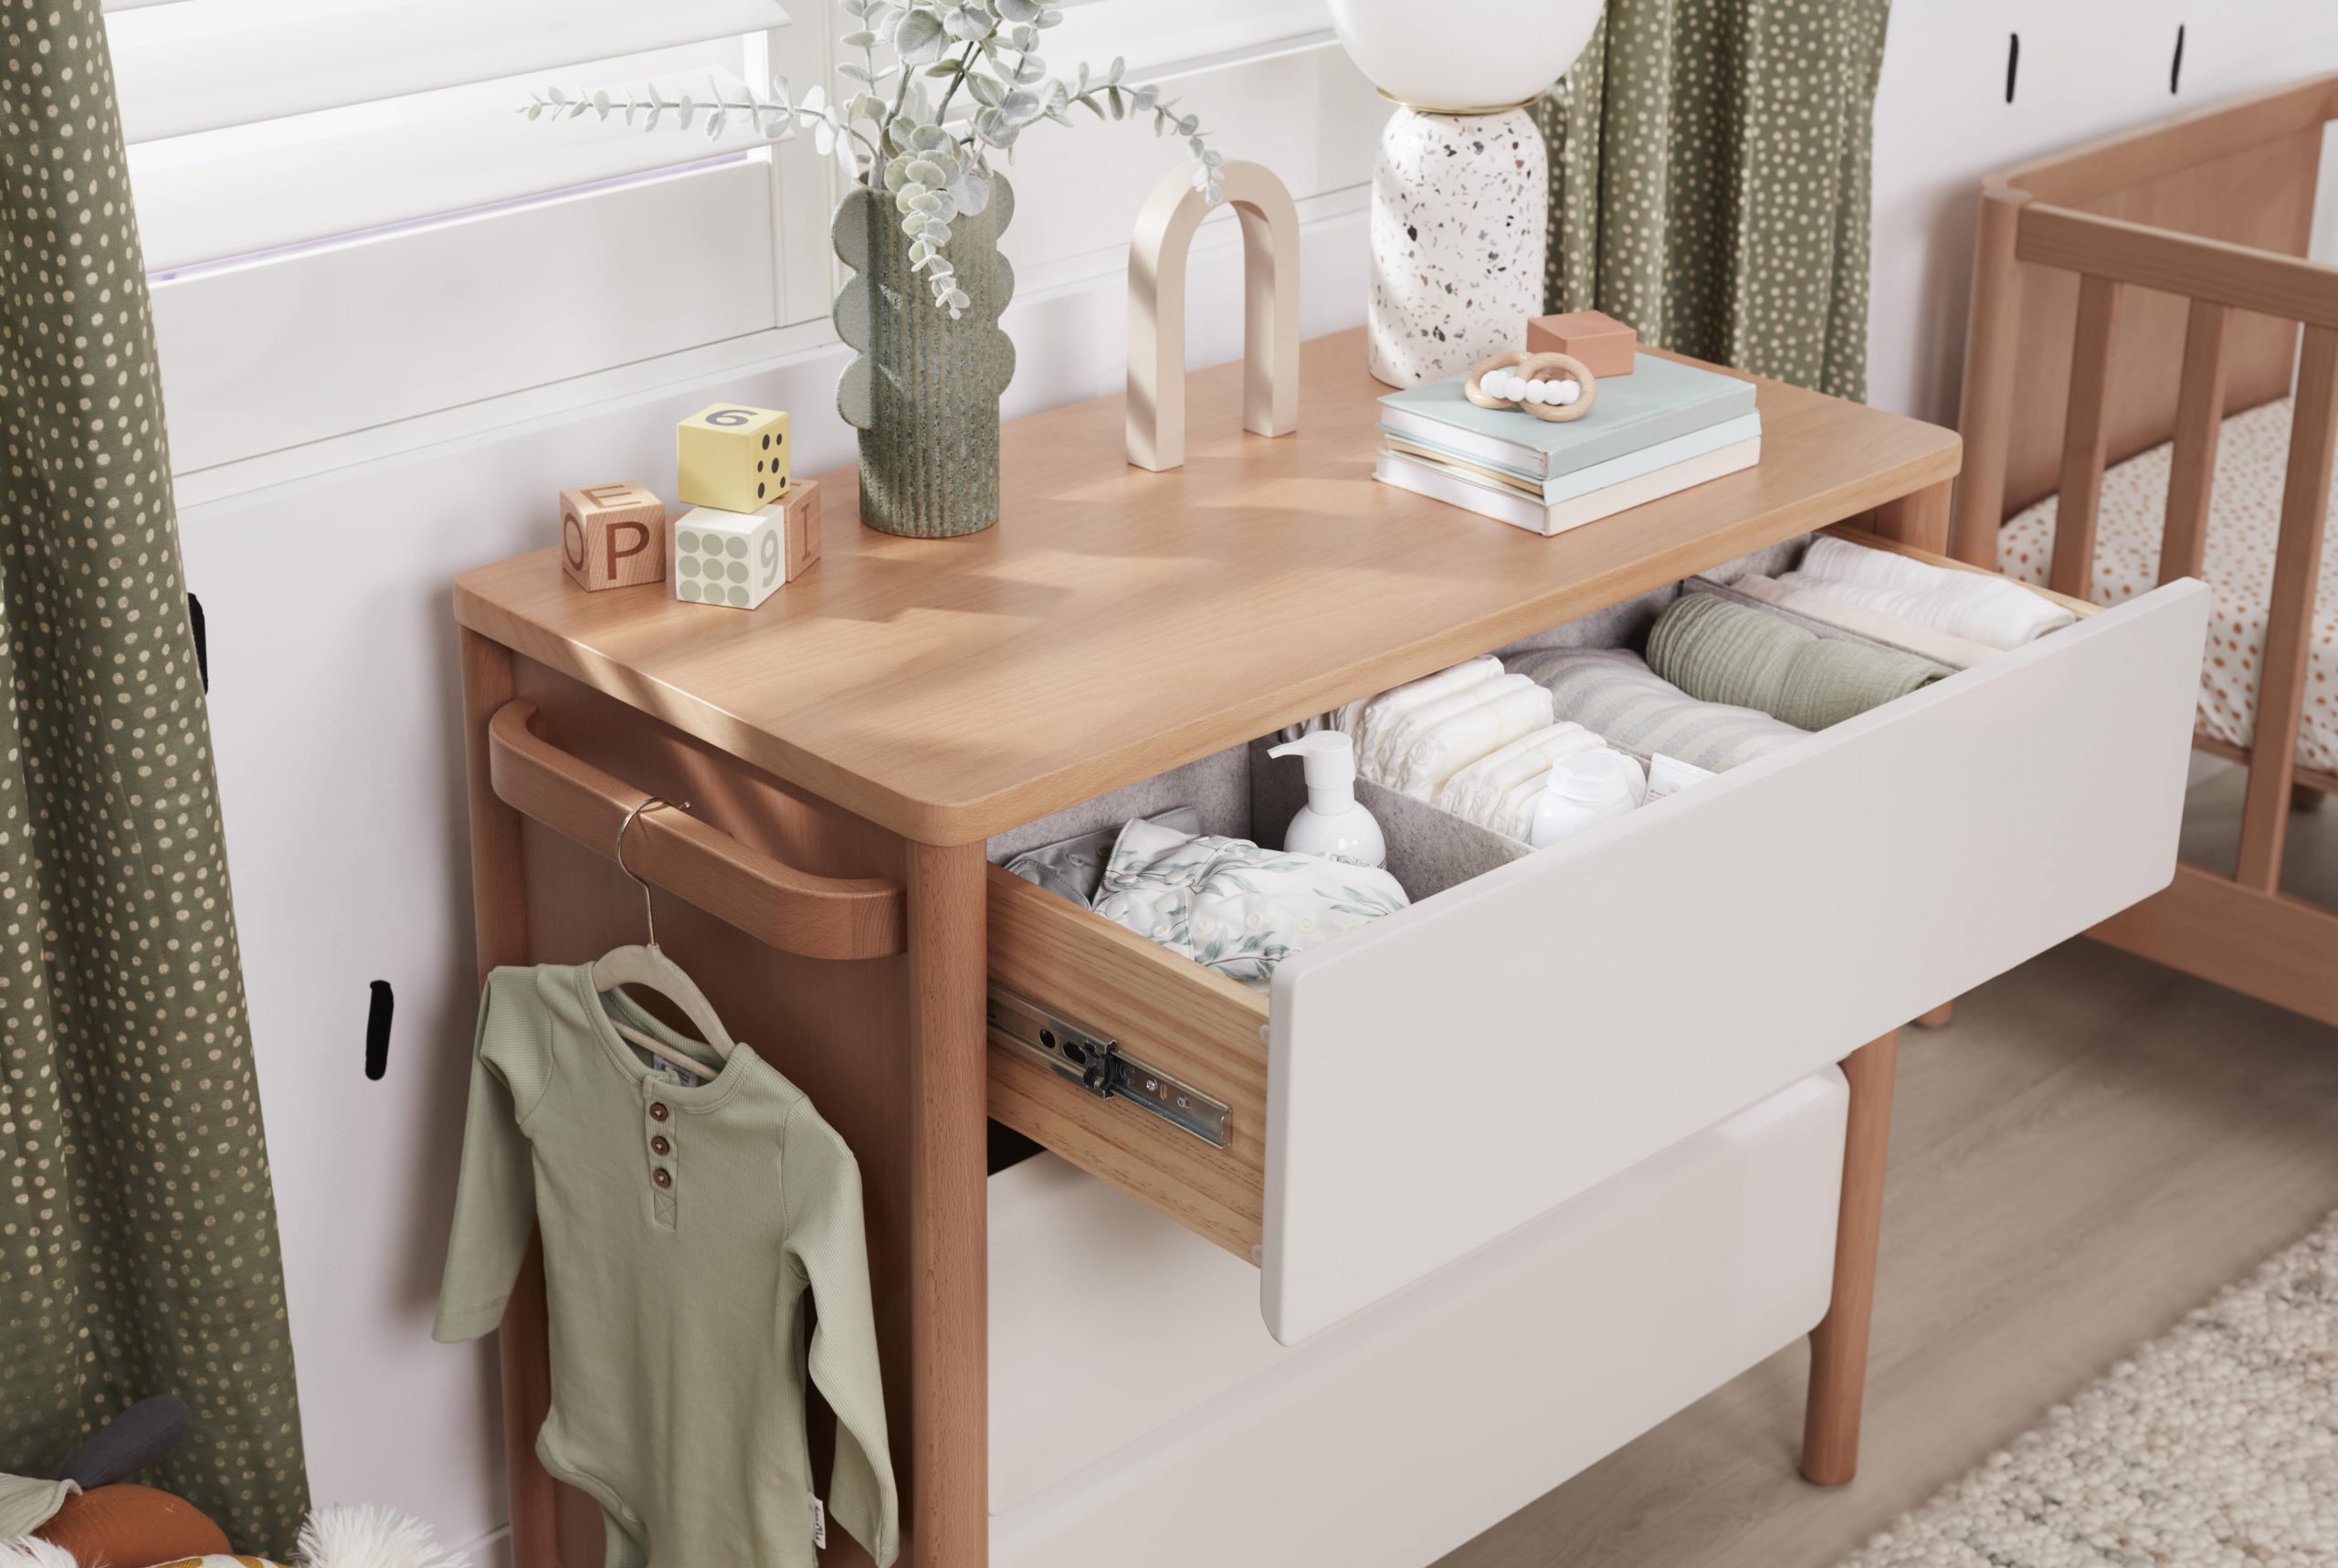 A stylish and multifunctional chest of drawers should be on every nursery essentials list